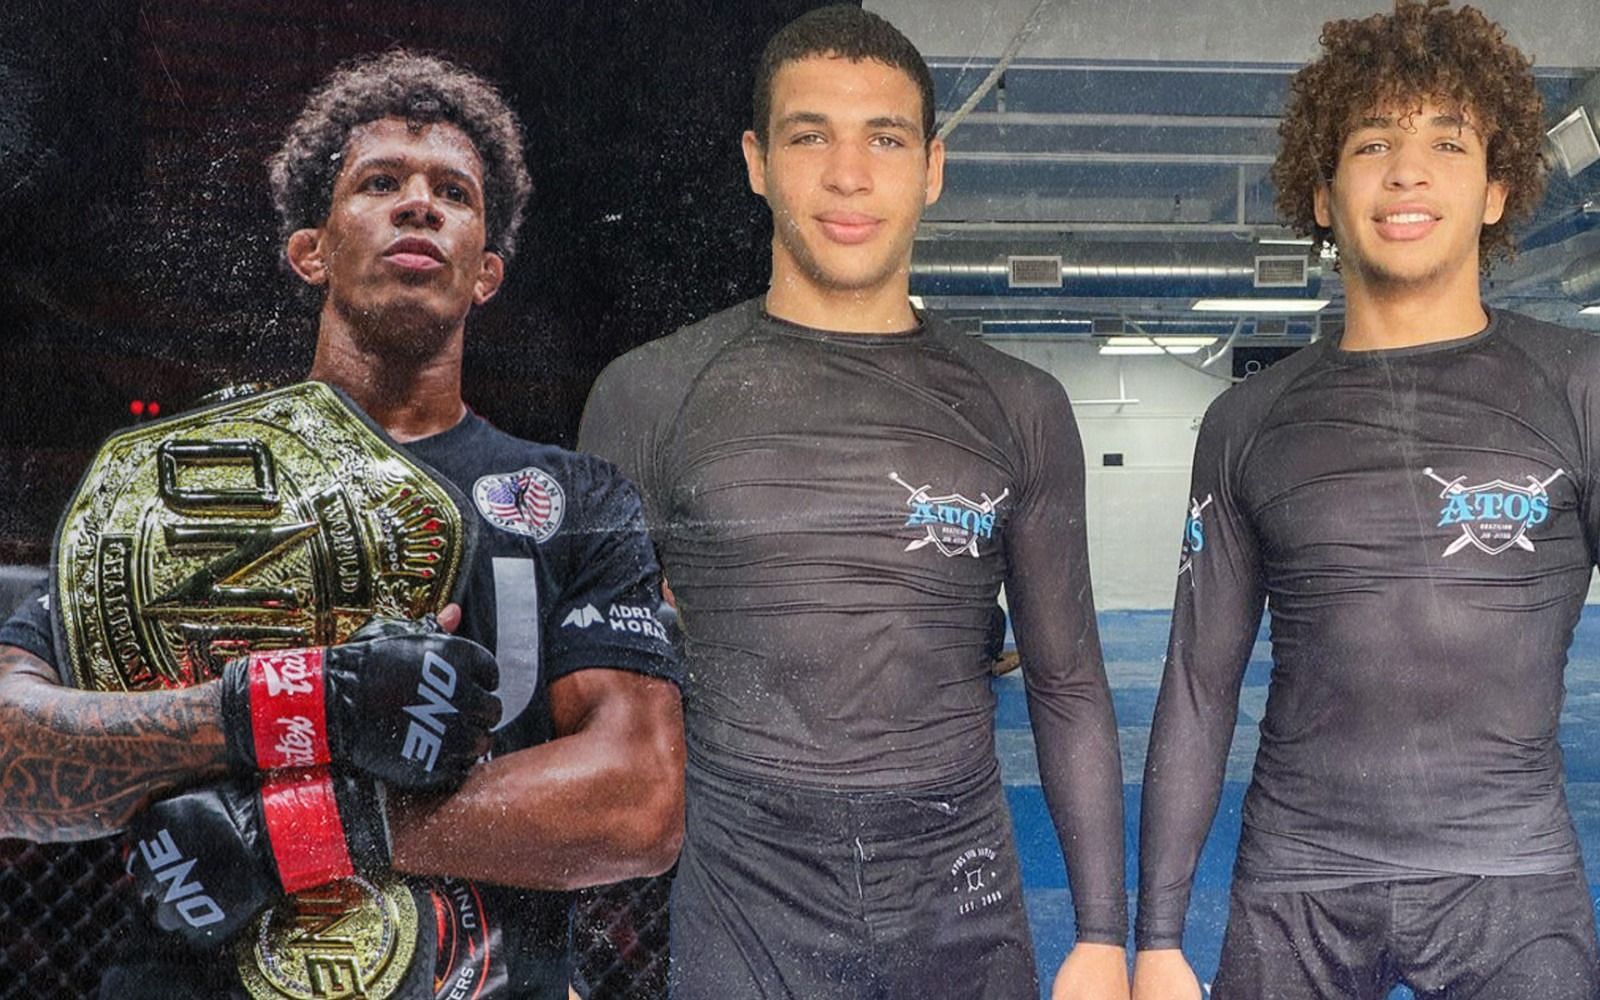 ONE flyweight world champion Adriano Moraes (left) thinks the Ruotolo Brothers have tremendous potential in MMA. (Image courtesy of ONE)